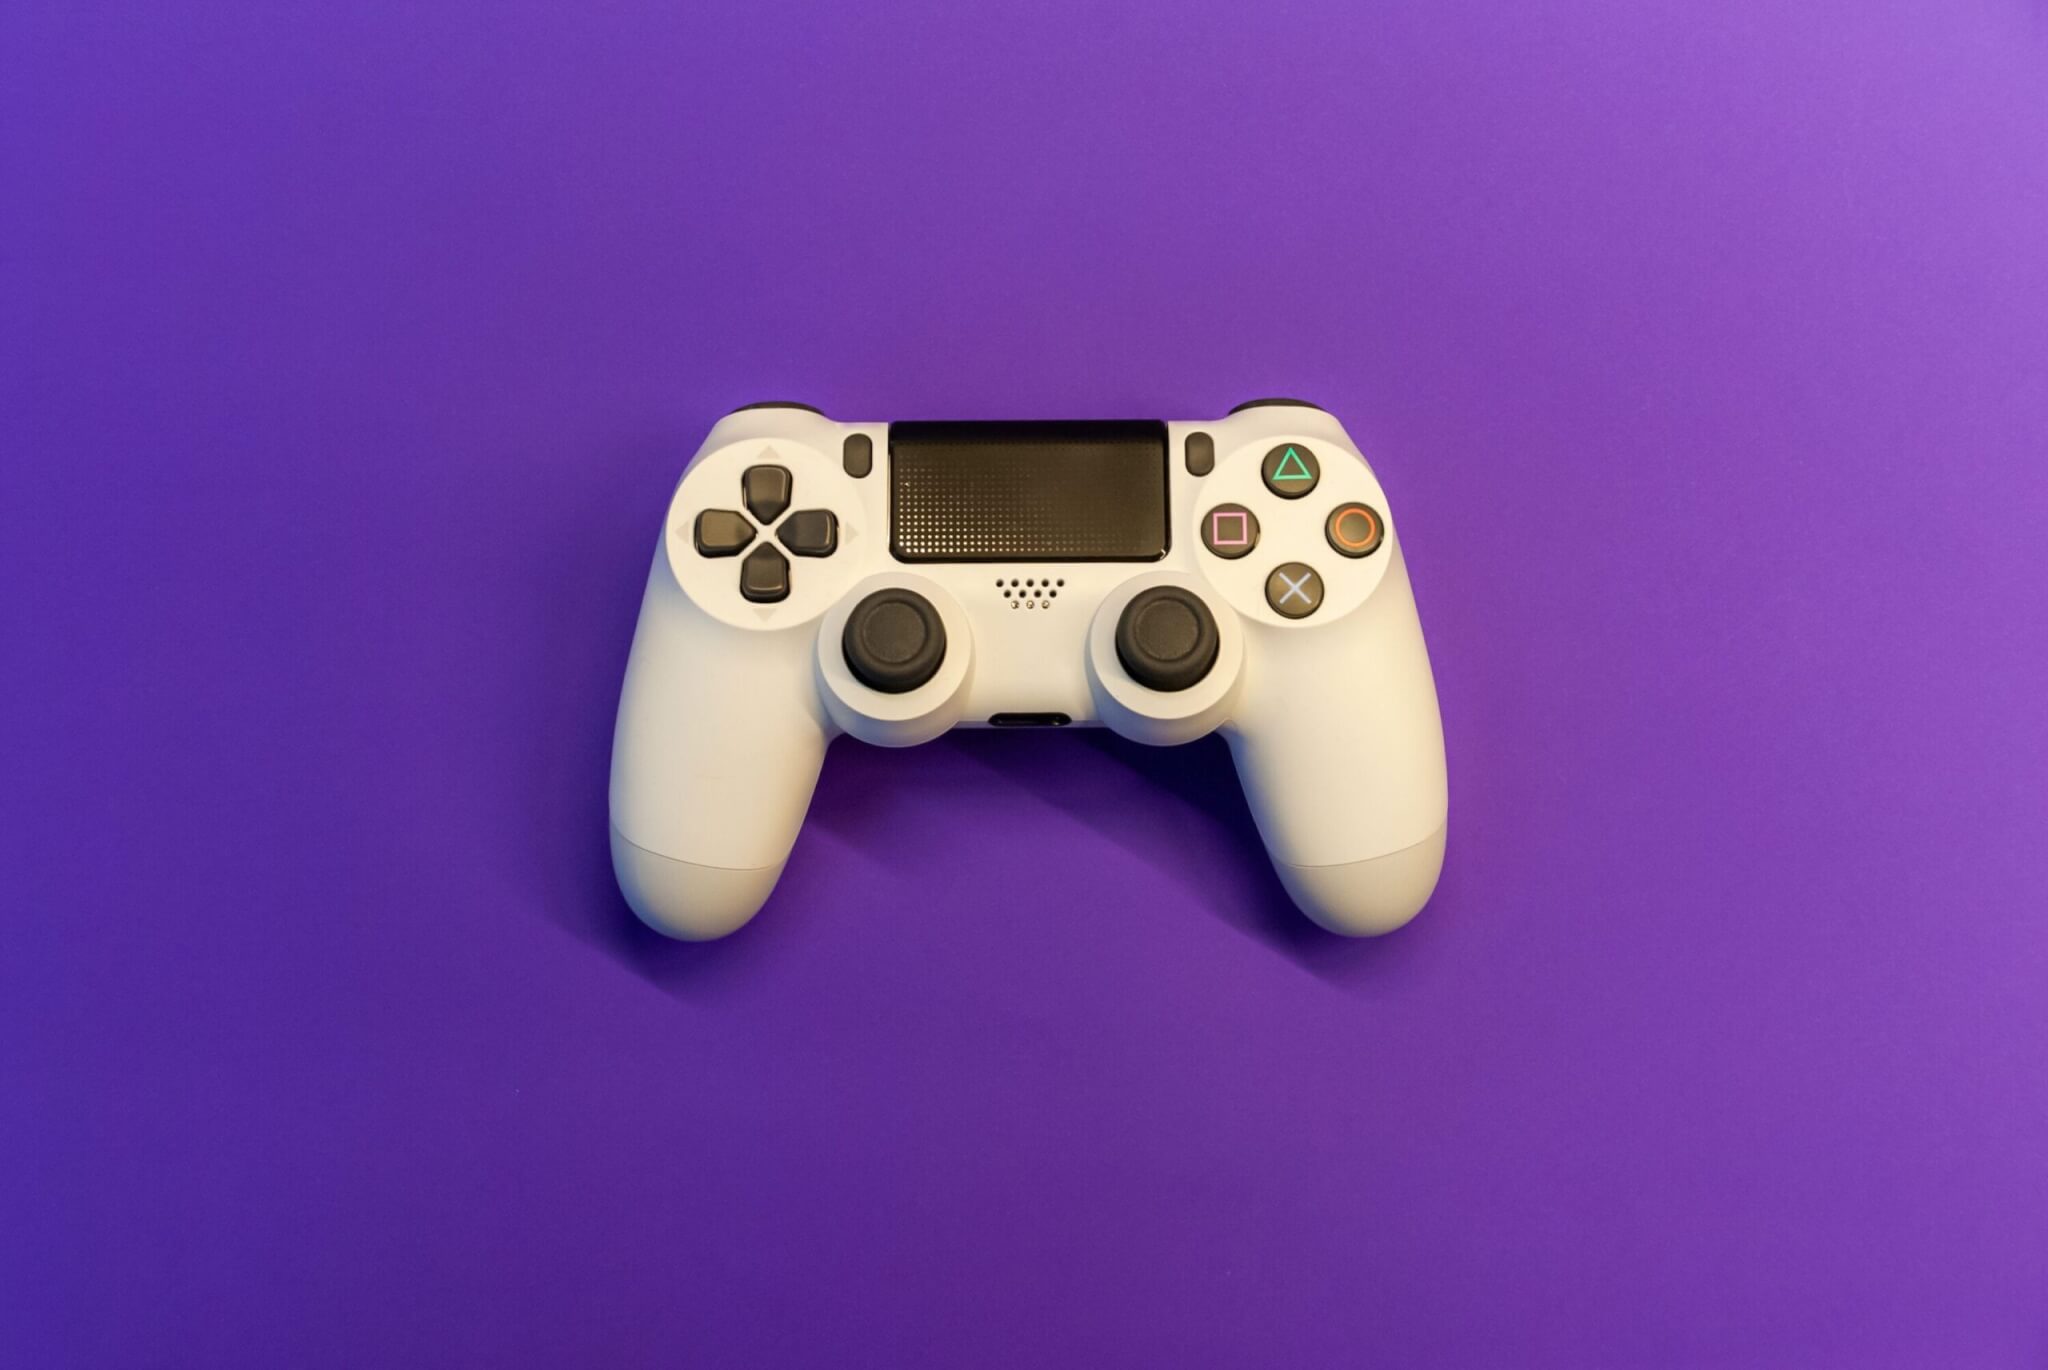 White PlayStation 4 Controller on Purple Backdrop